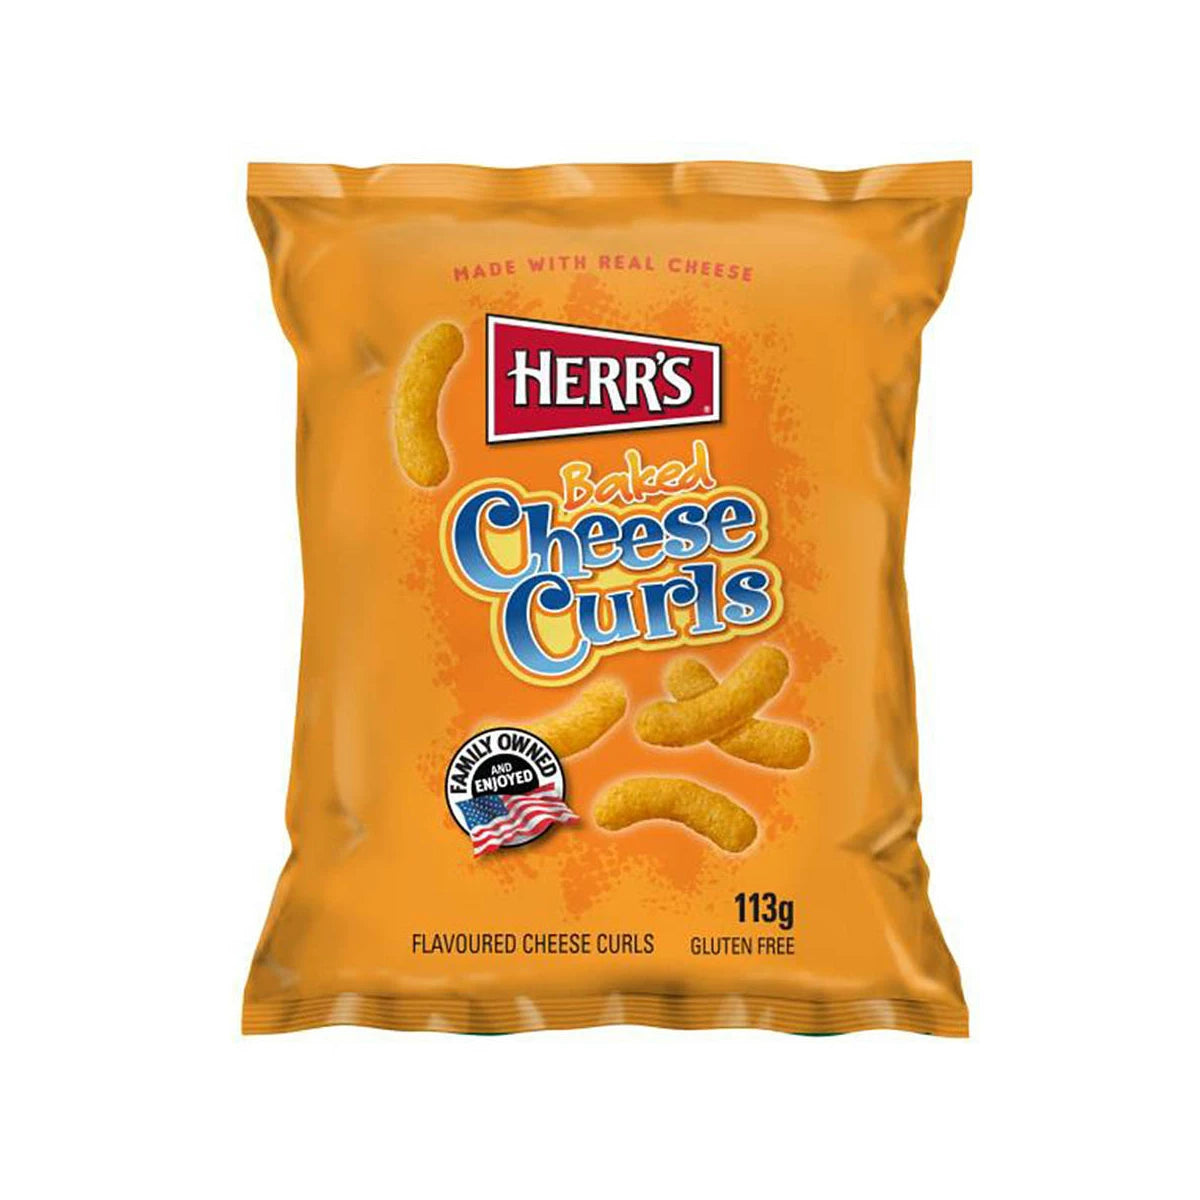 HERR´S Baked Cheese Curls